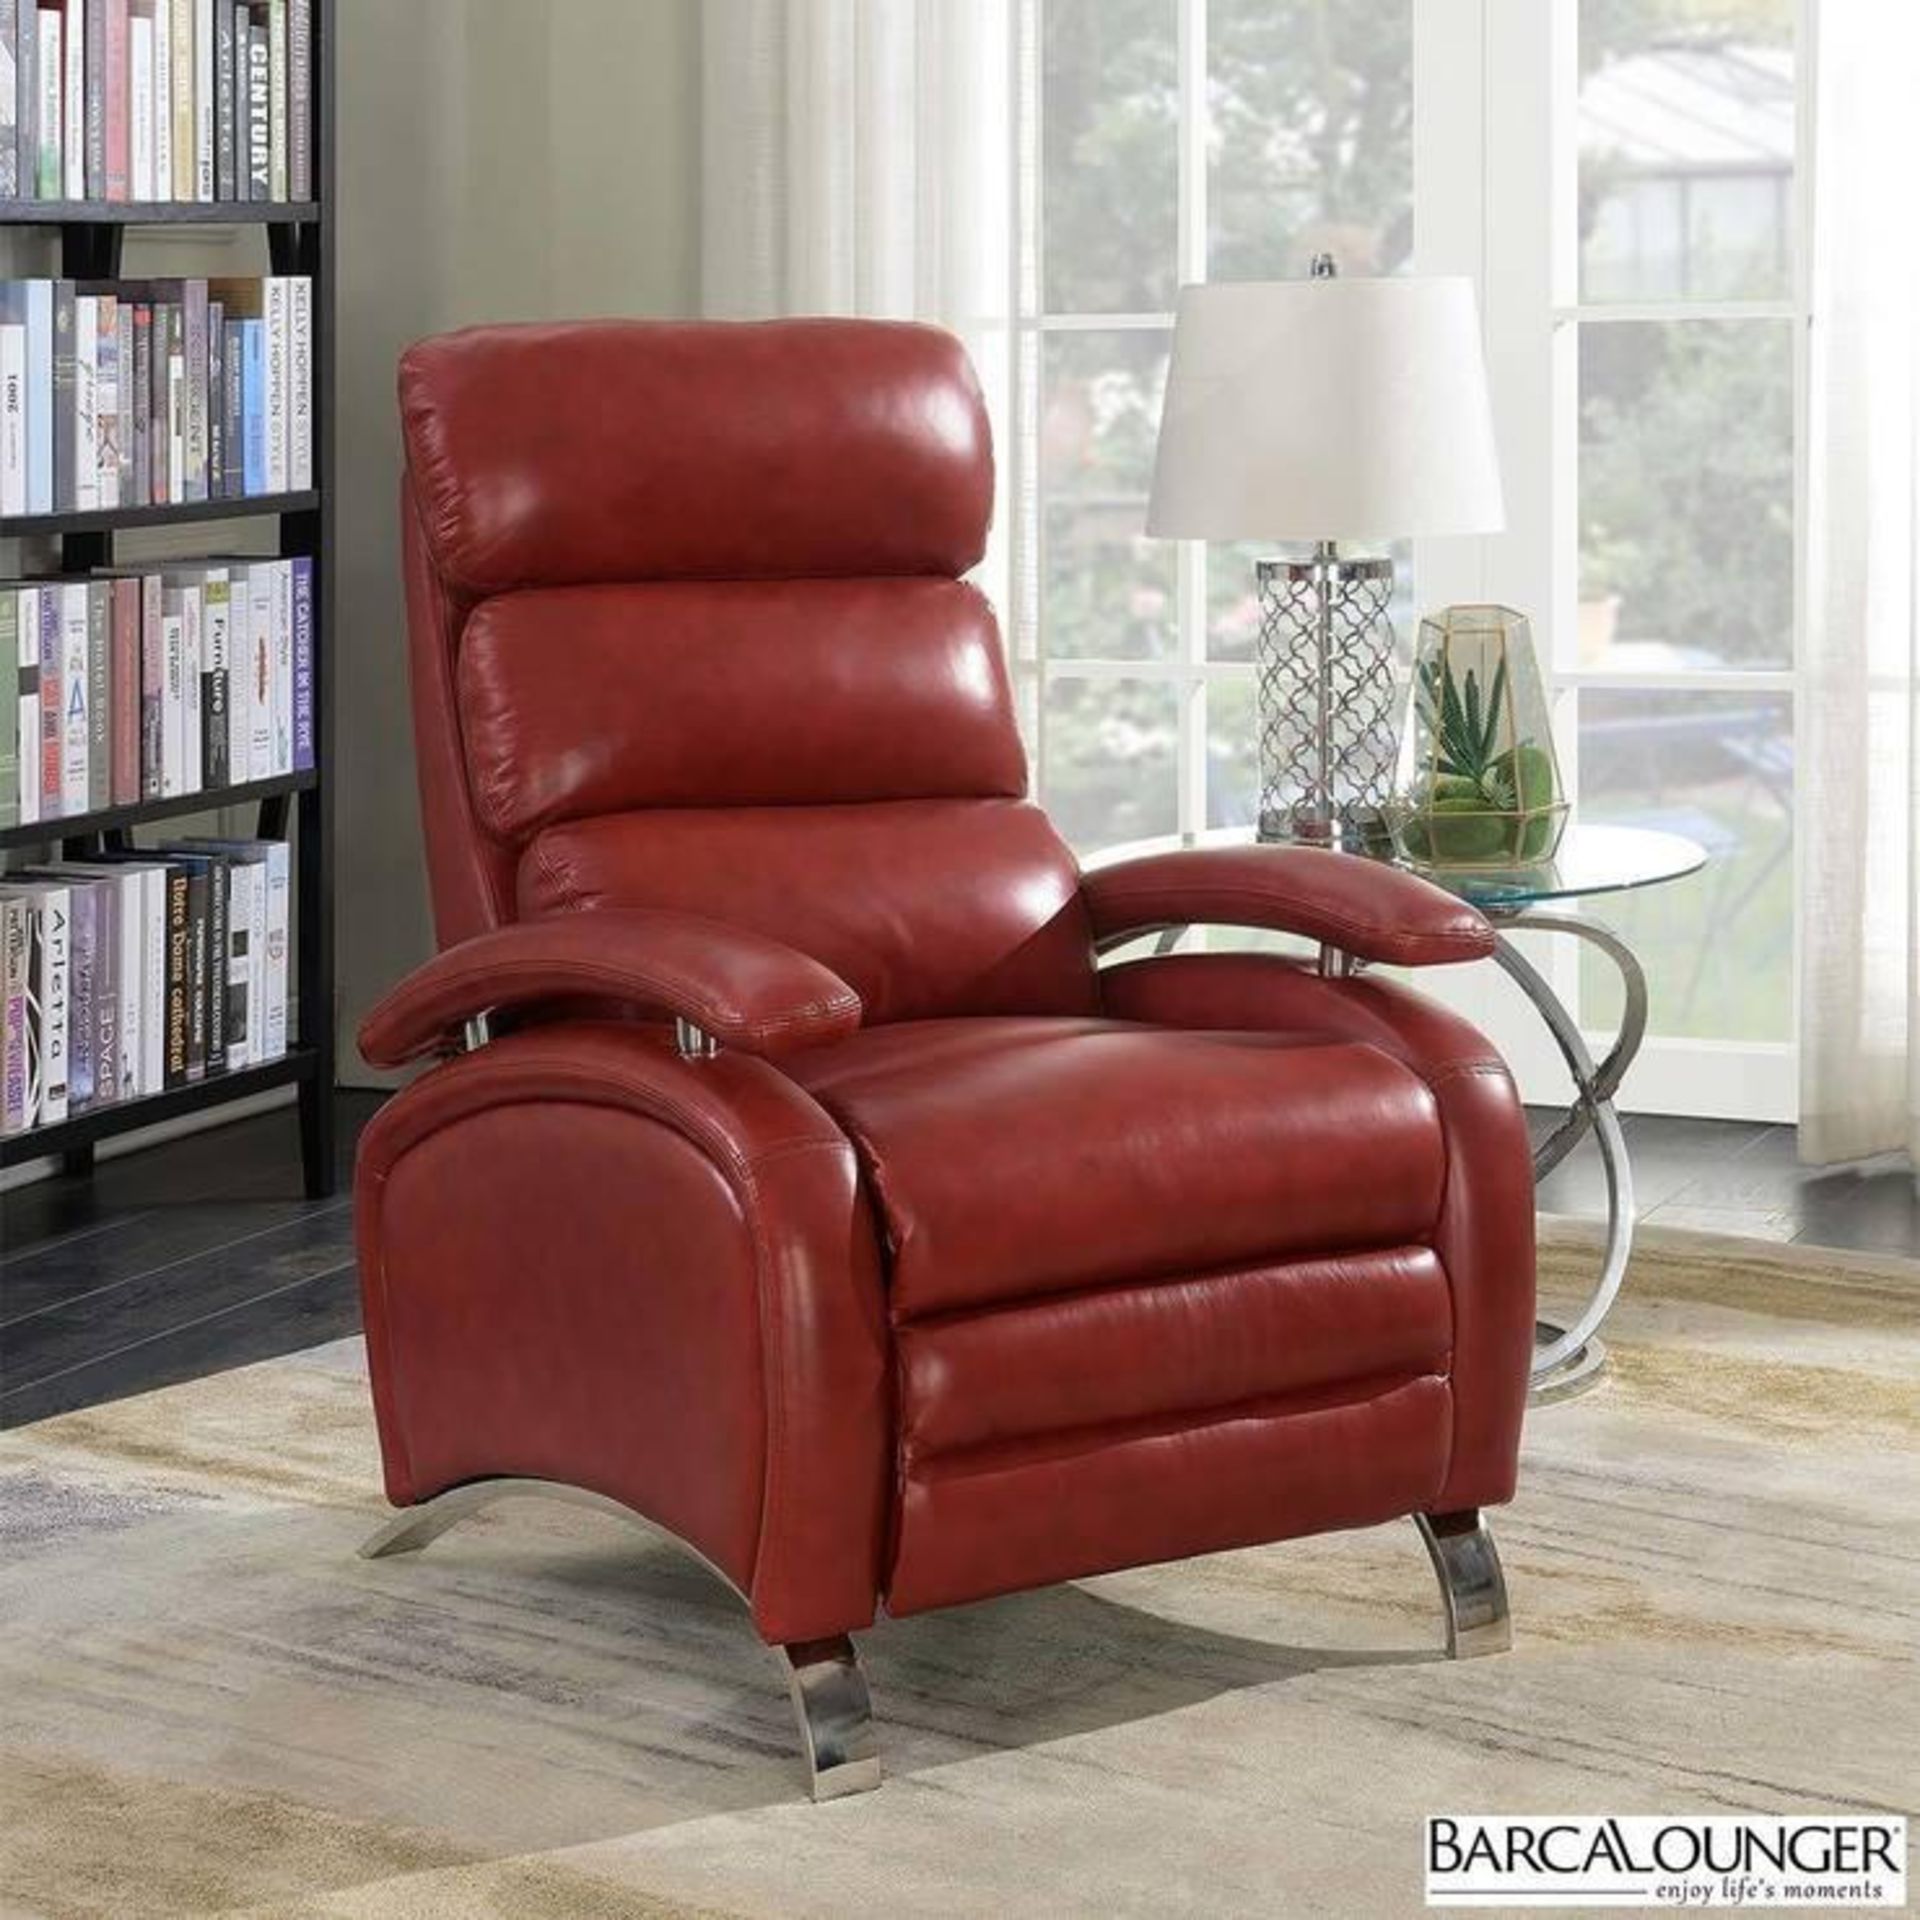 BARCALOUNGER PEGASUS Red Leather Recliner Wholesale Price: $400 each